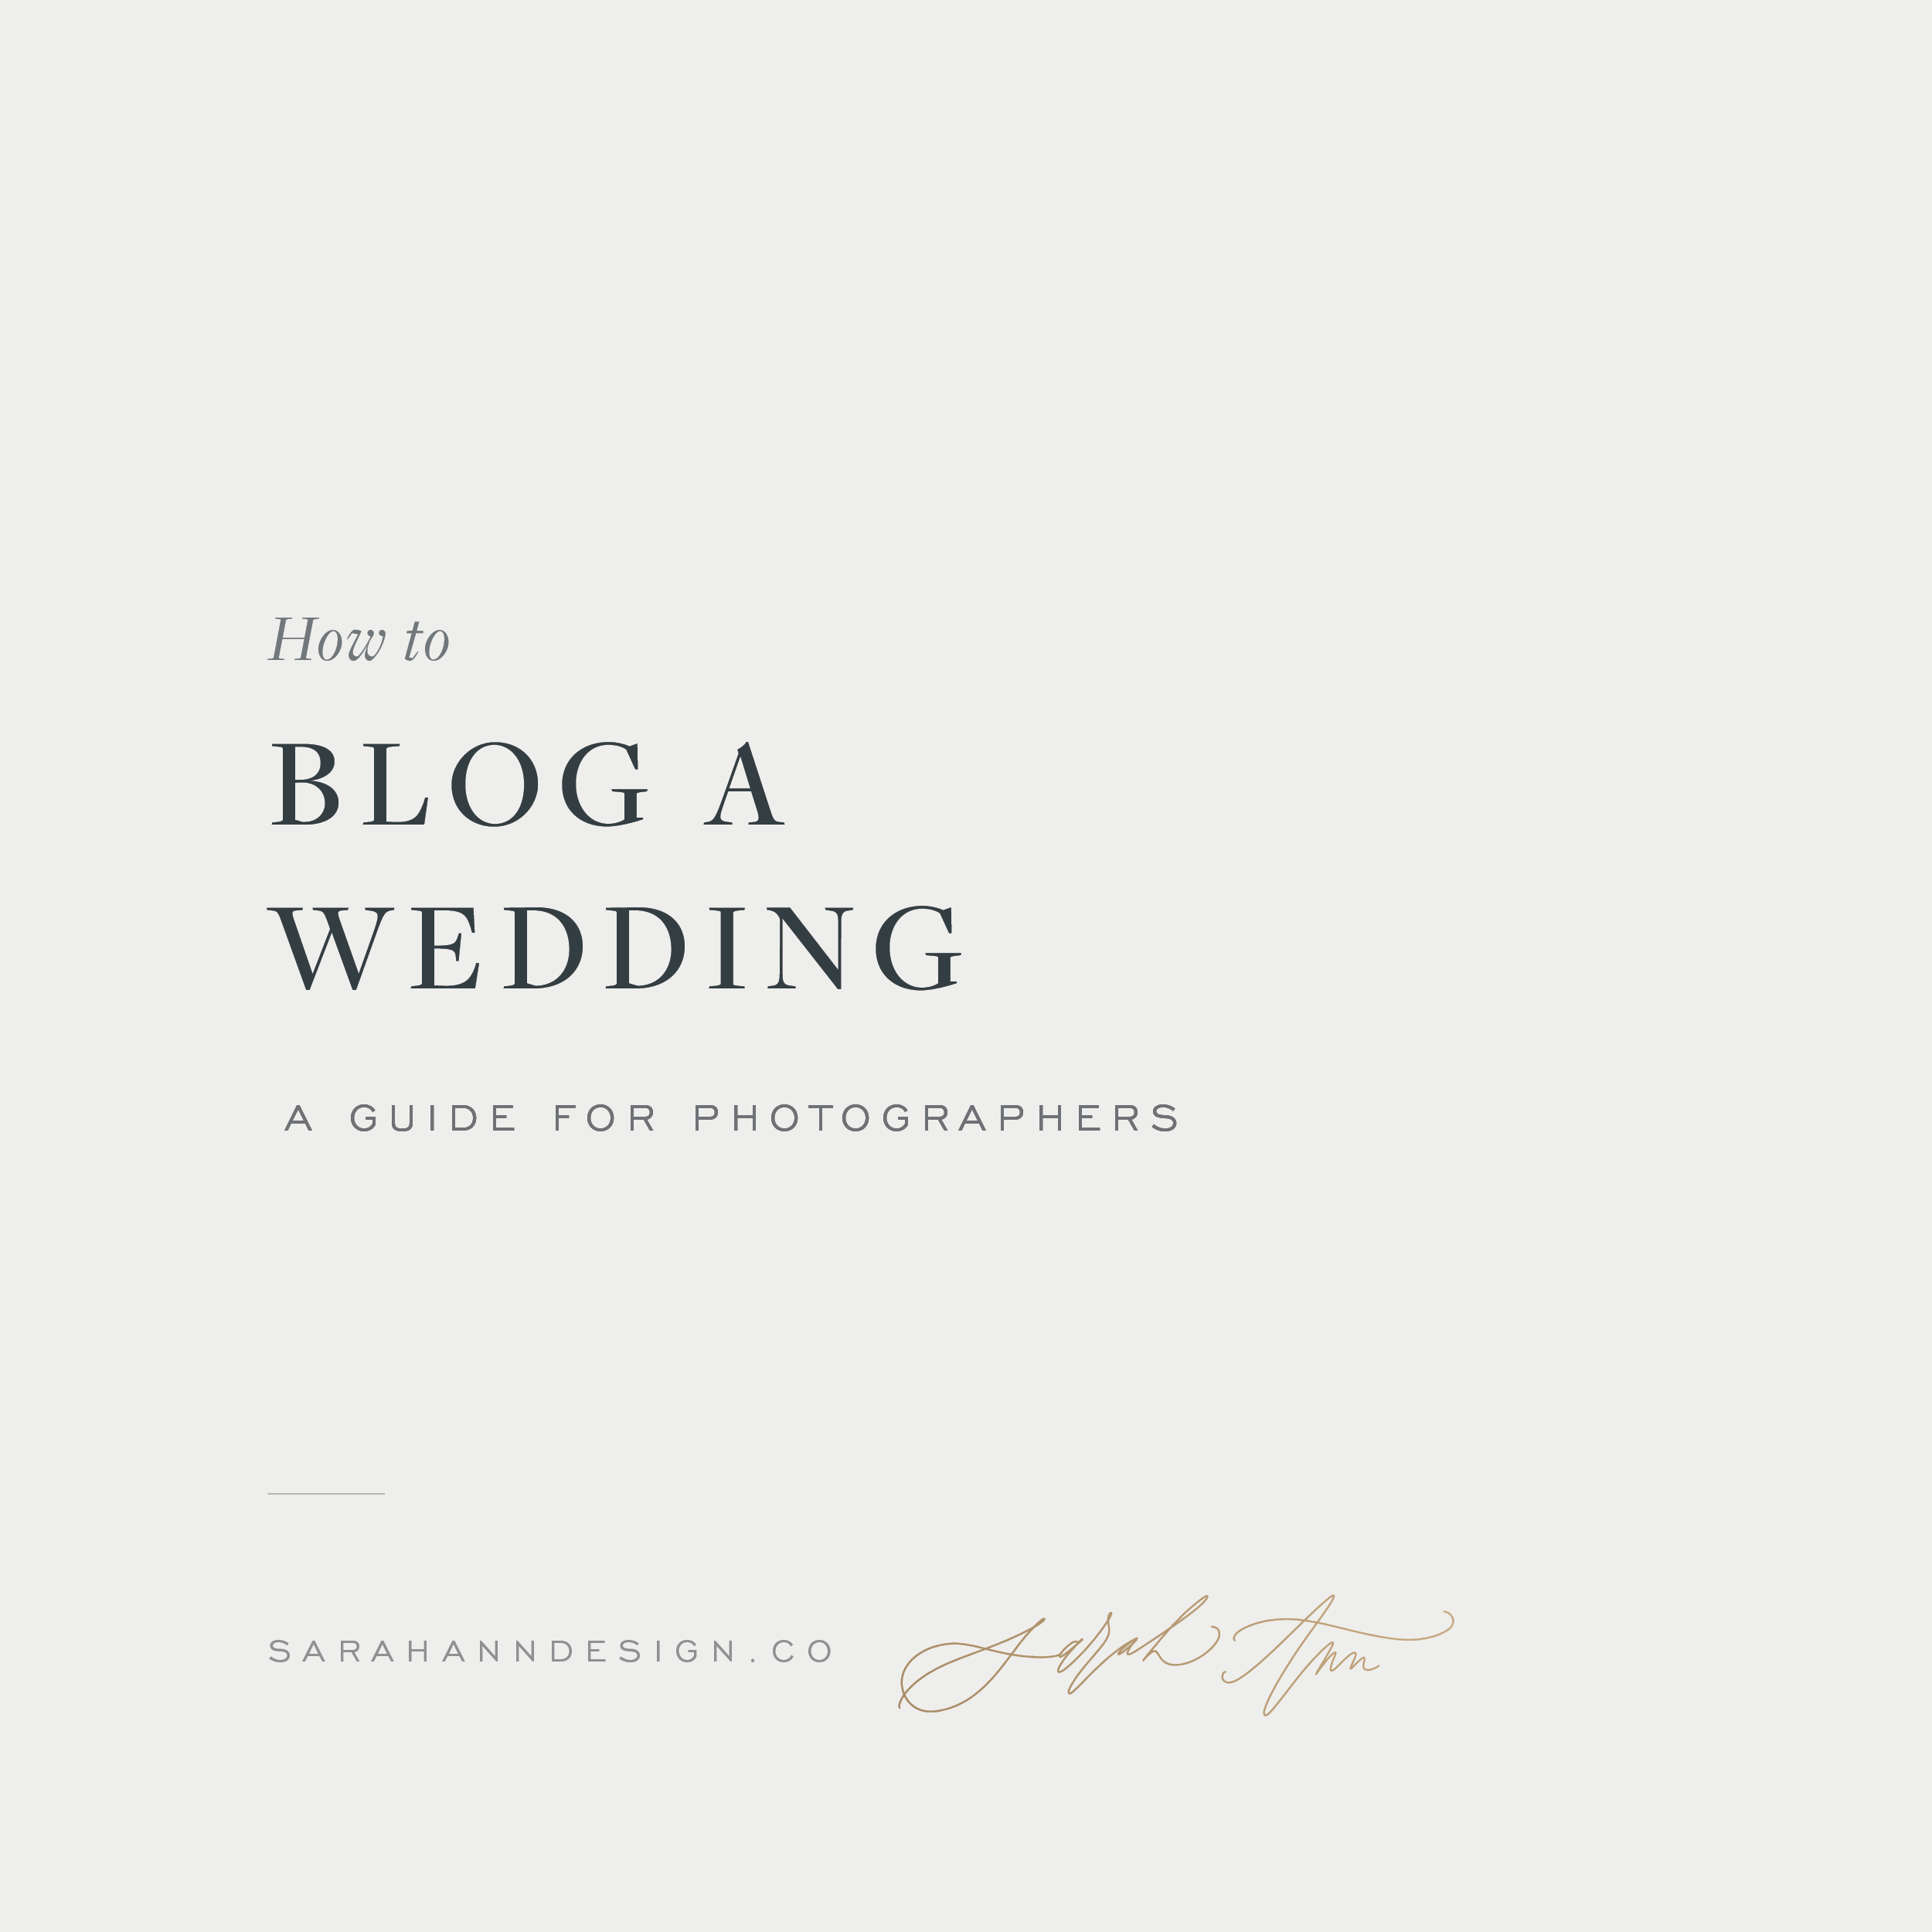 Tips for Photographers - How to Blog a Wedding - Outline and SEO Guidelines - Sarah Ann Design